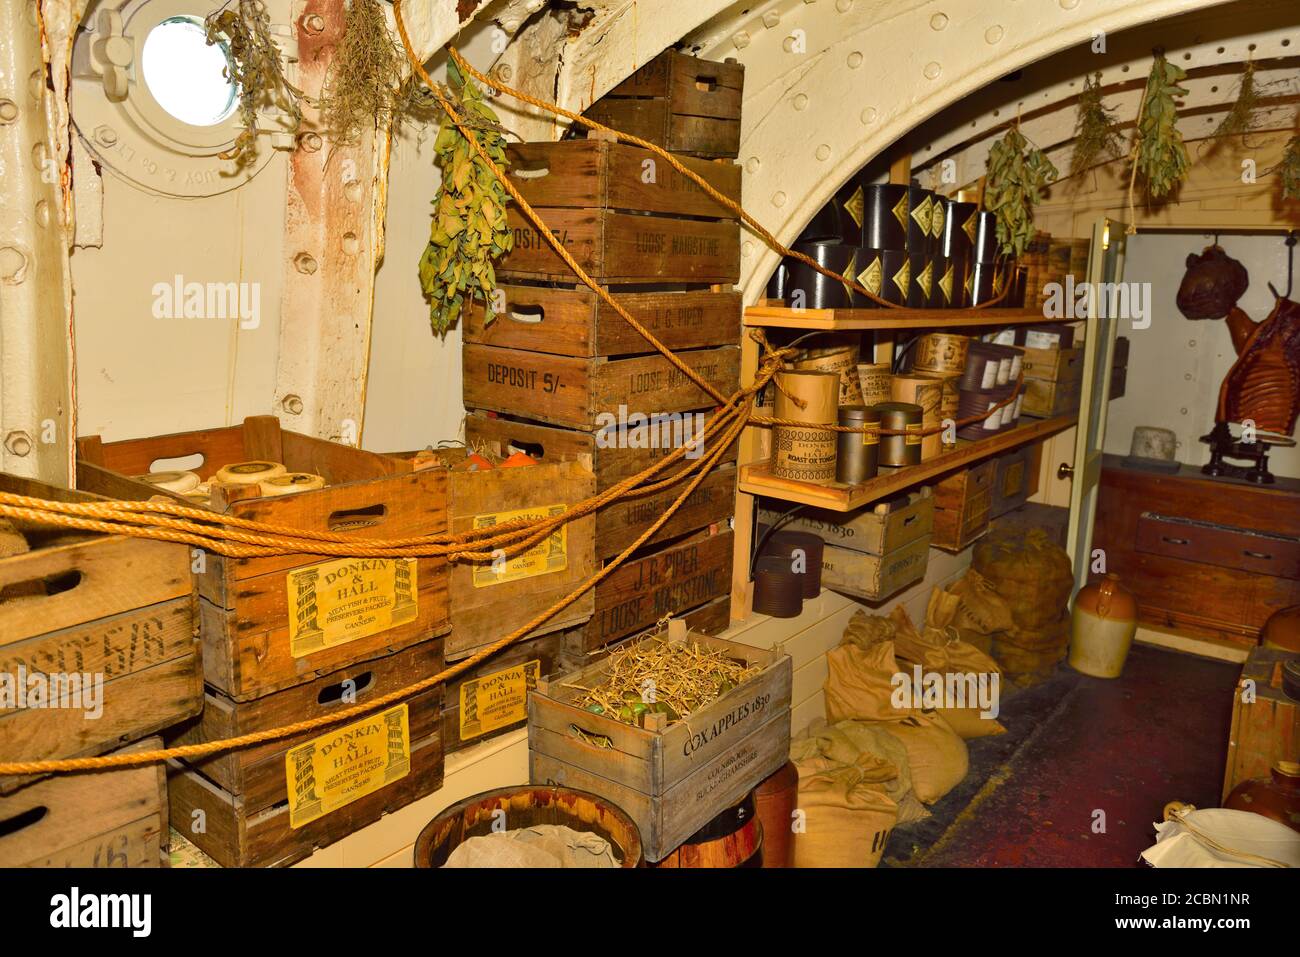 Interior of historic ocean liner SS Great Britain, food storage as it might have been in 1843 Stock Photo